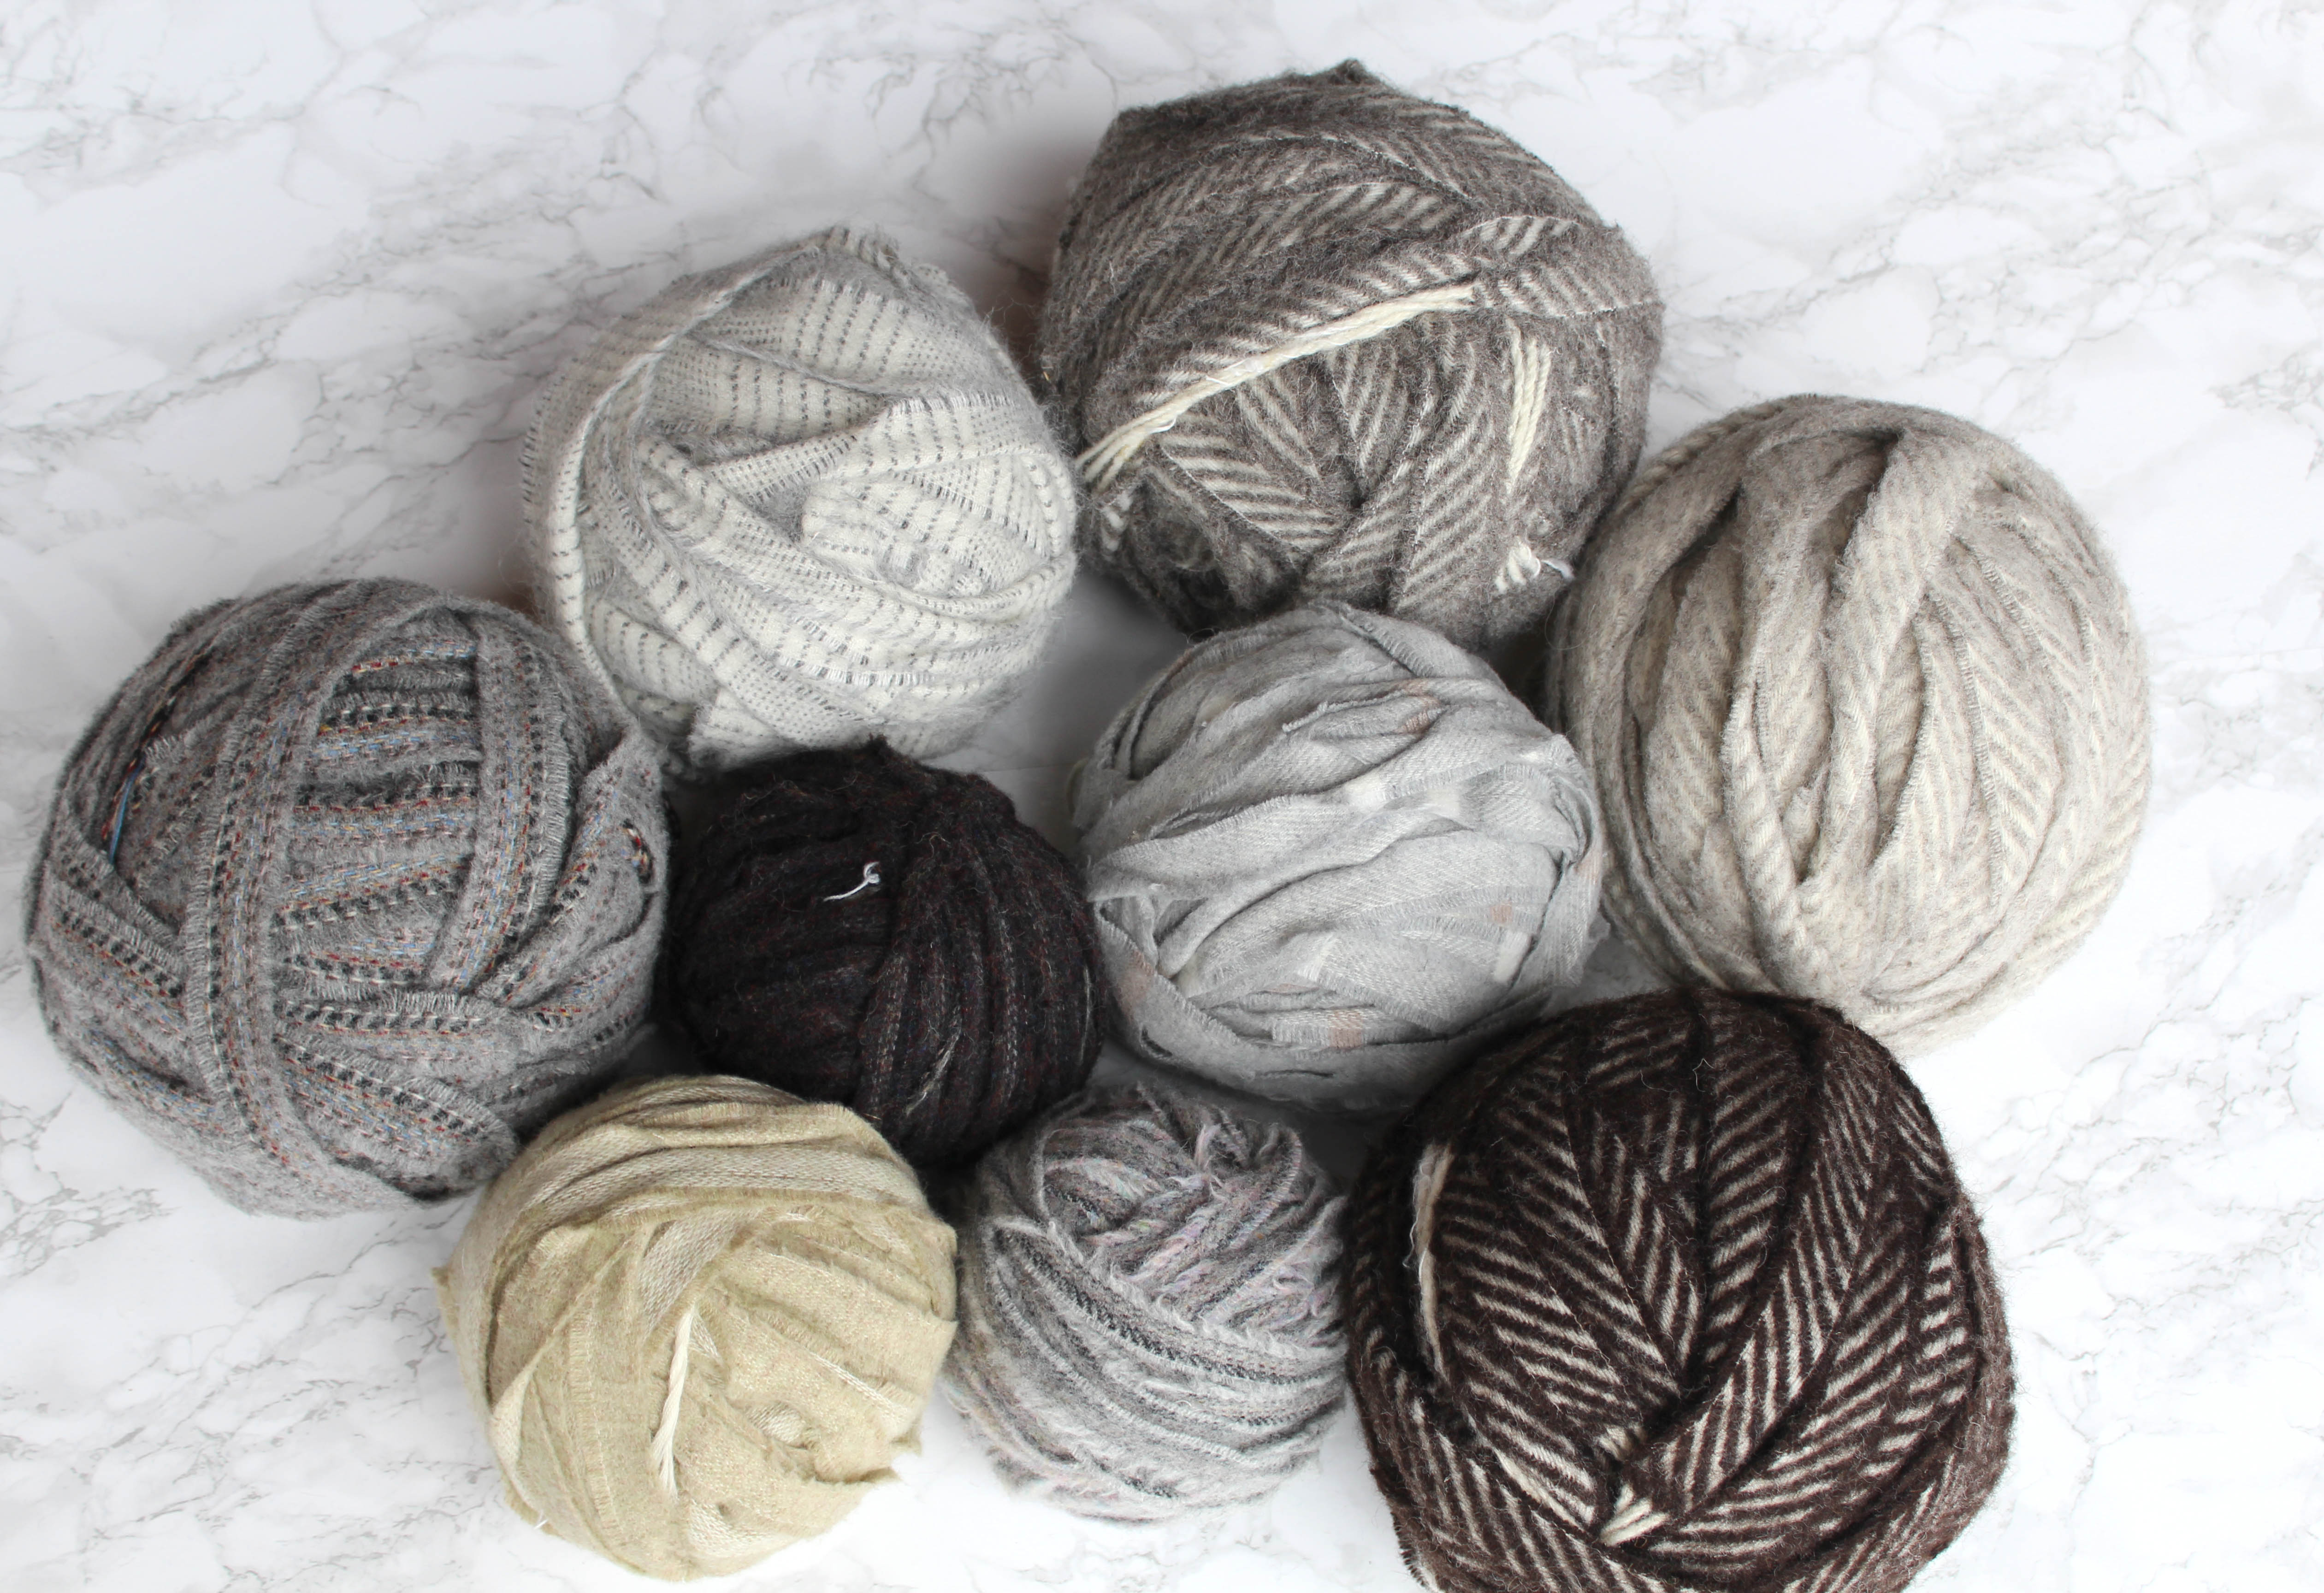 Grey, brown and cream balls of blanket yarn for rug making and knitting